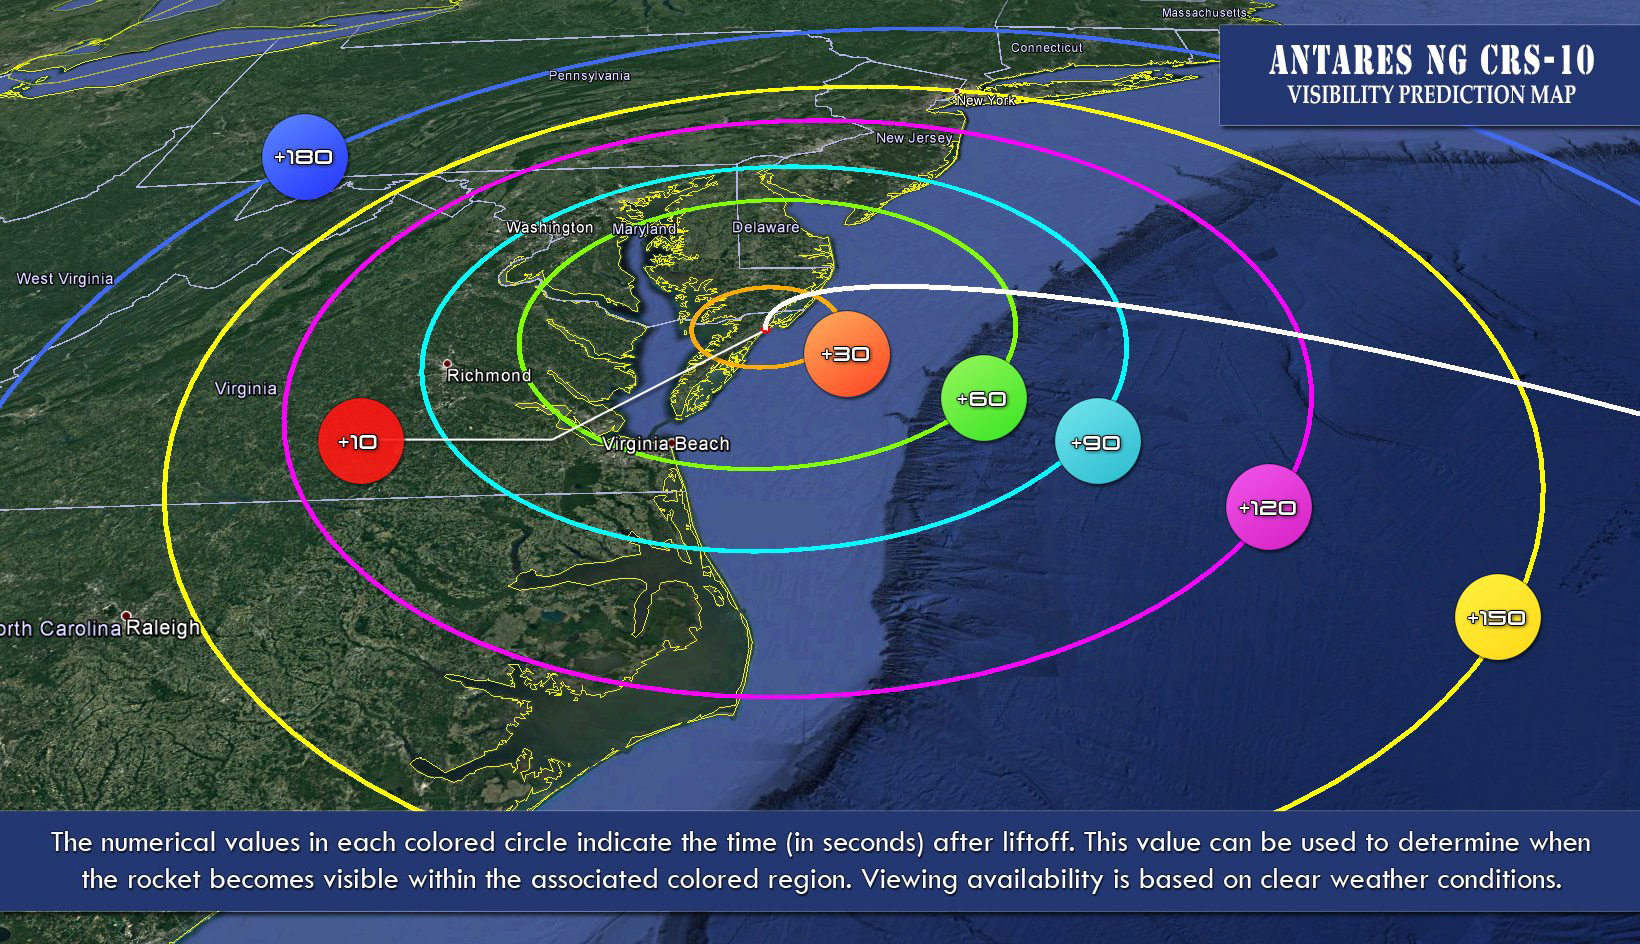 Viewing map of East Coast with circles highlighting seconds after launch to look for the rocket